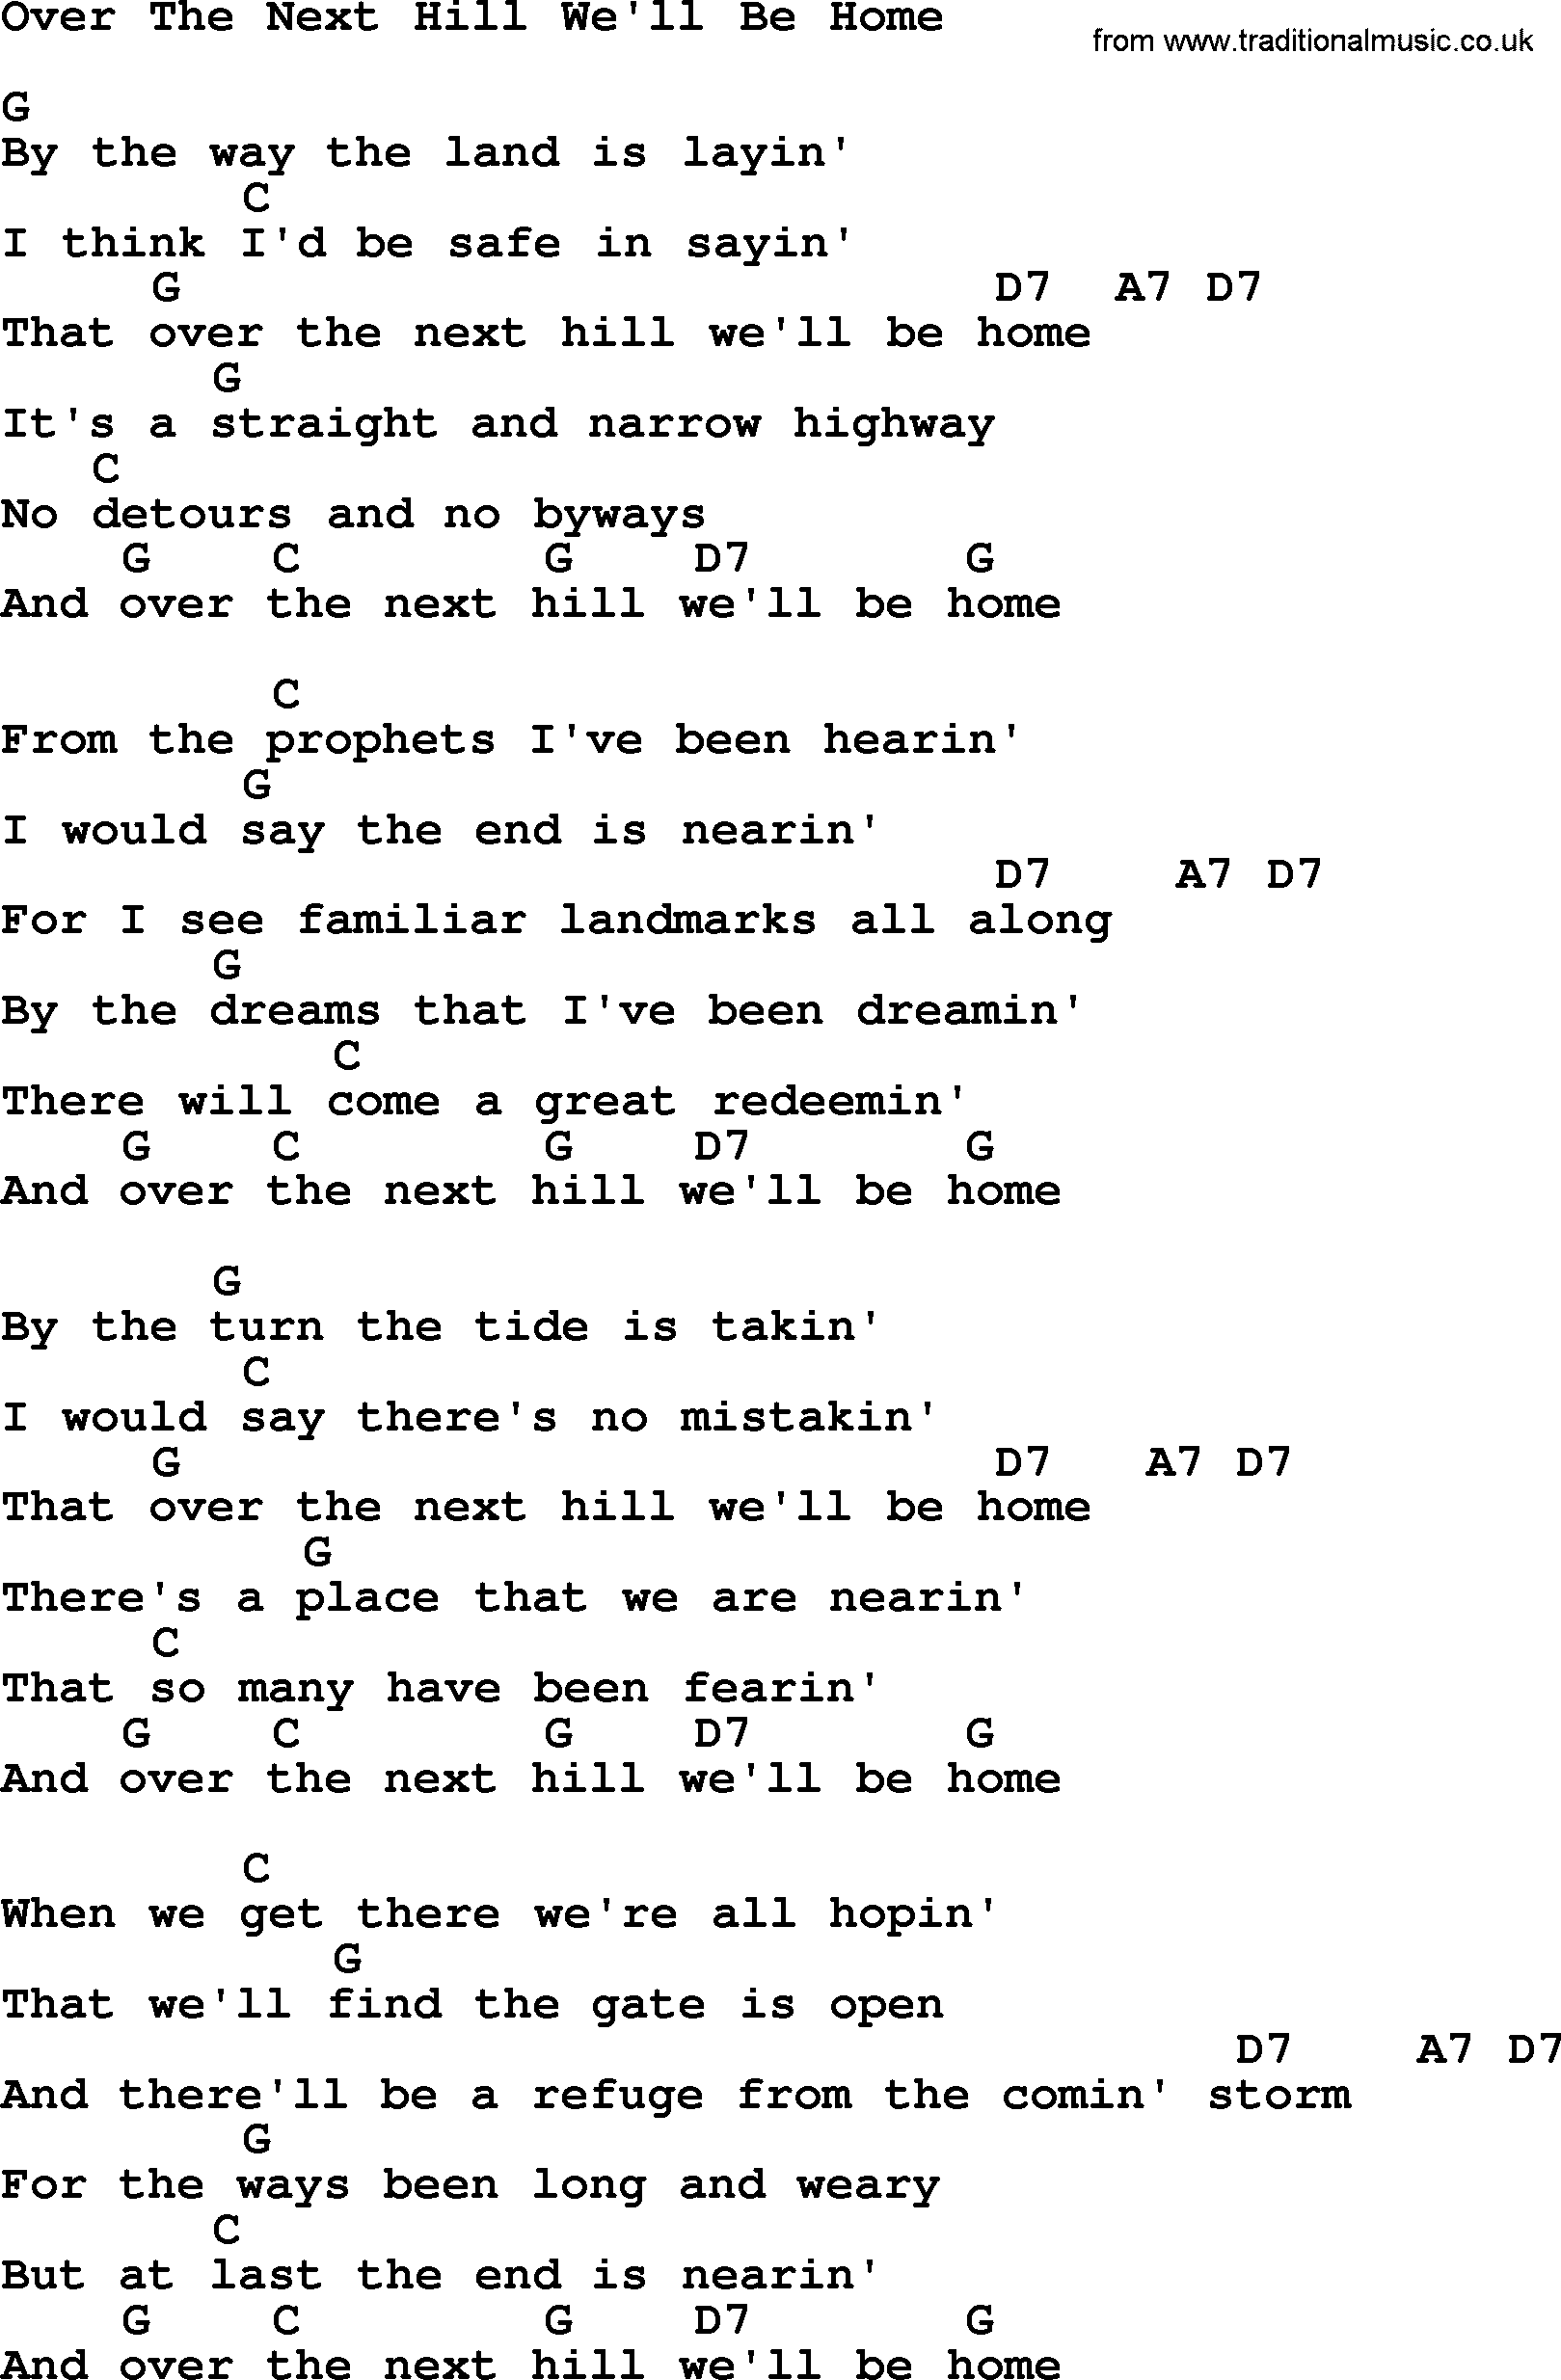 Johnny Cash song Over The Next Hill We'll Be Home, lyrics and chords